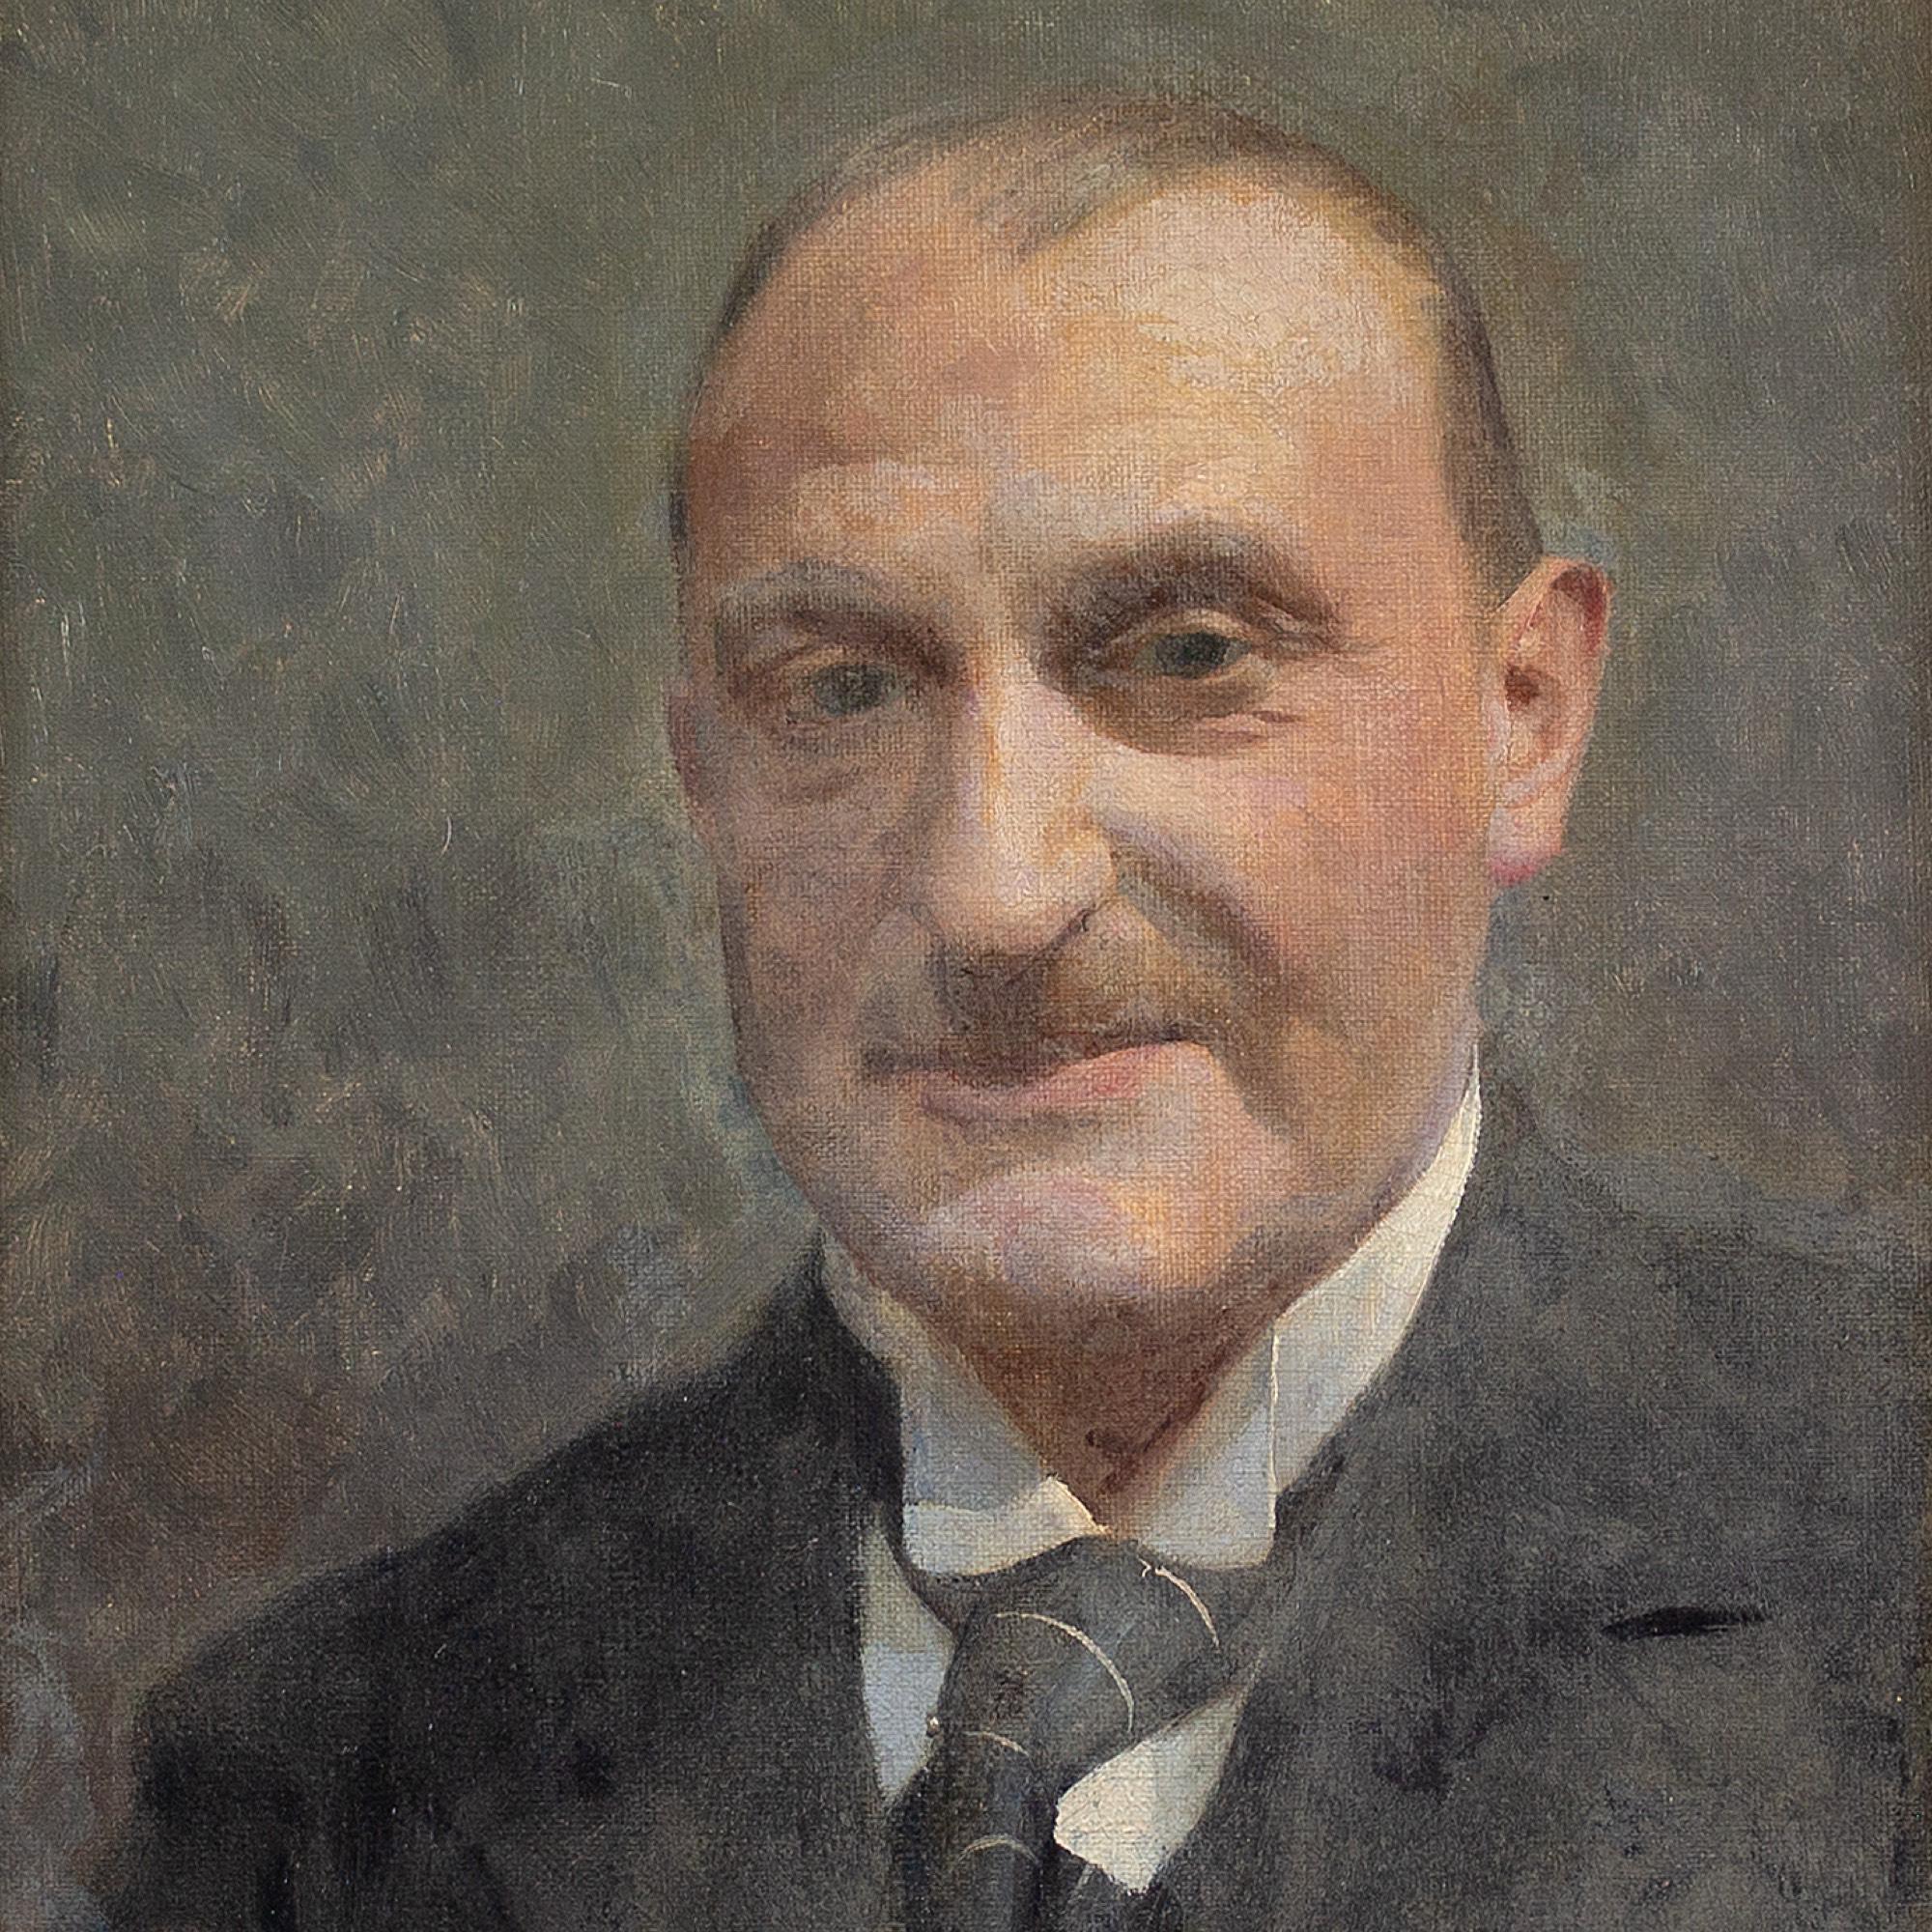 This early 20th-century portrait by eminent Danish artist Peter (Peder Mork) Mønsted (1859-1941) depicts local dignitary Aage Jørgensen (1879-1960). It’s an informal portrayal that suggests an established friendship.

Jørgensen was a